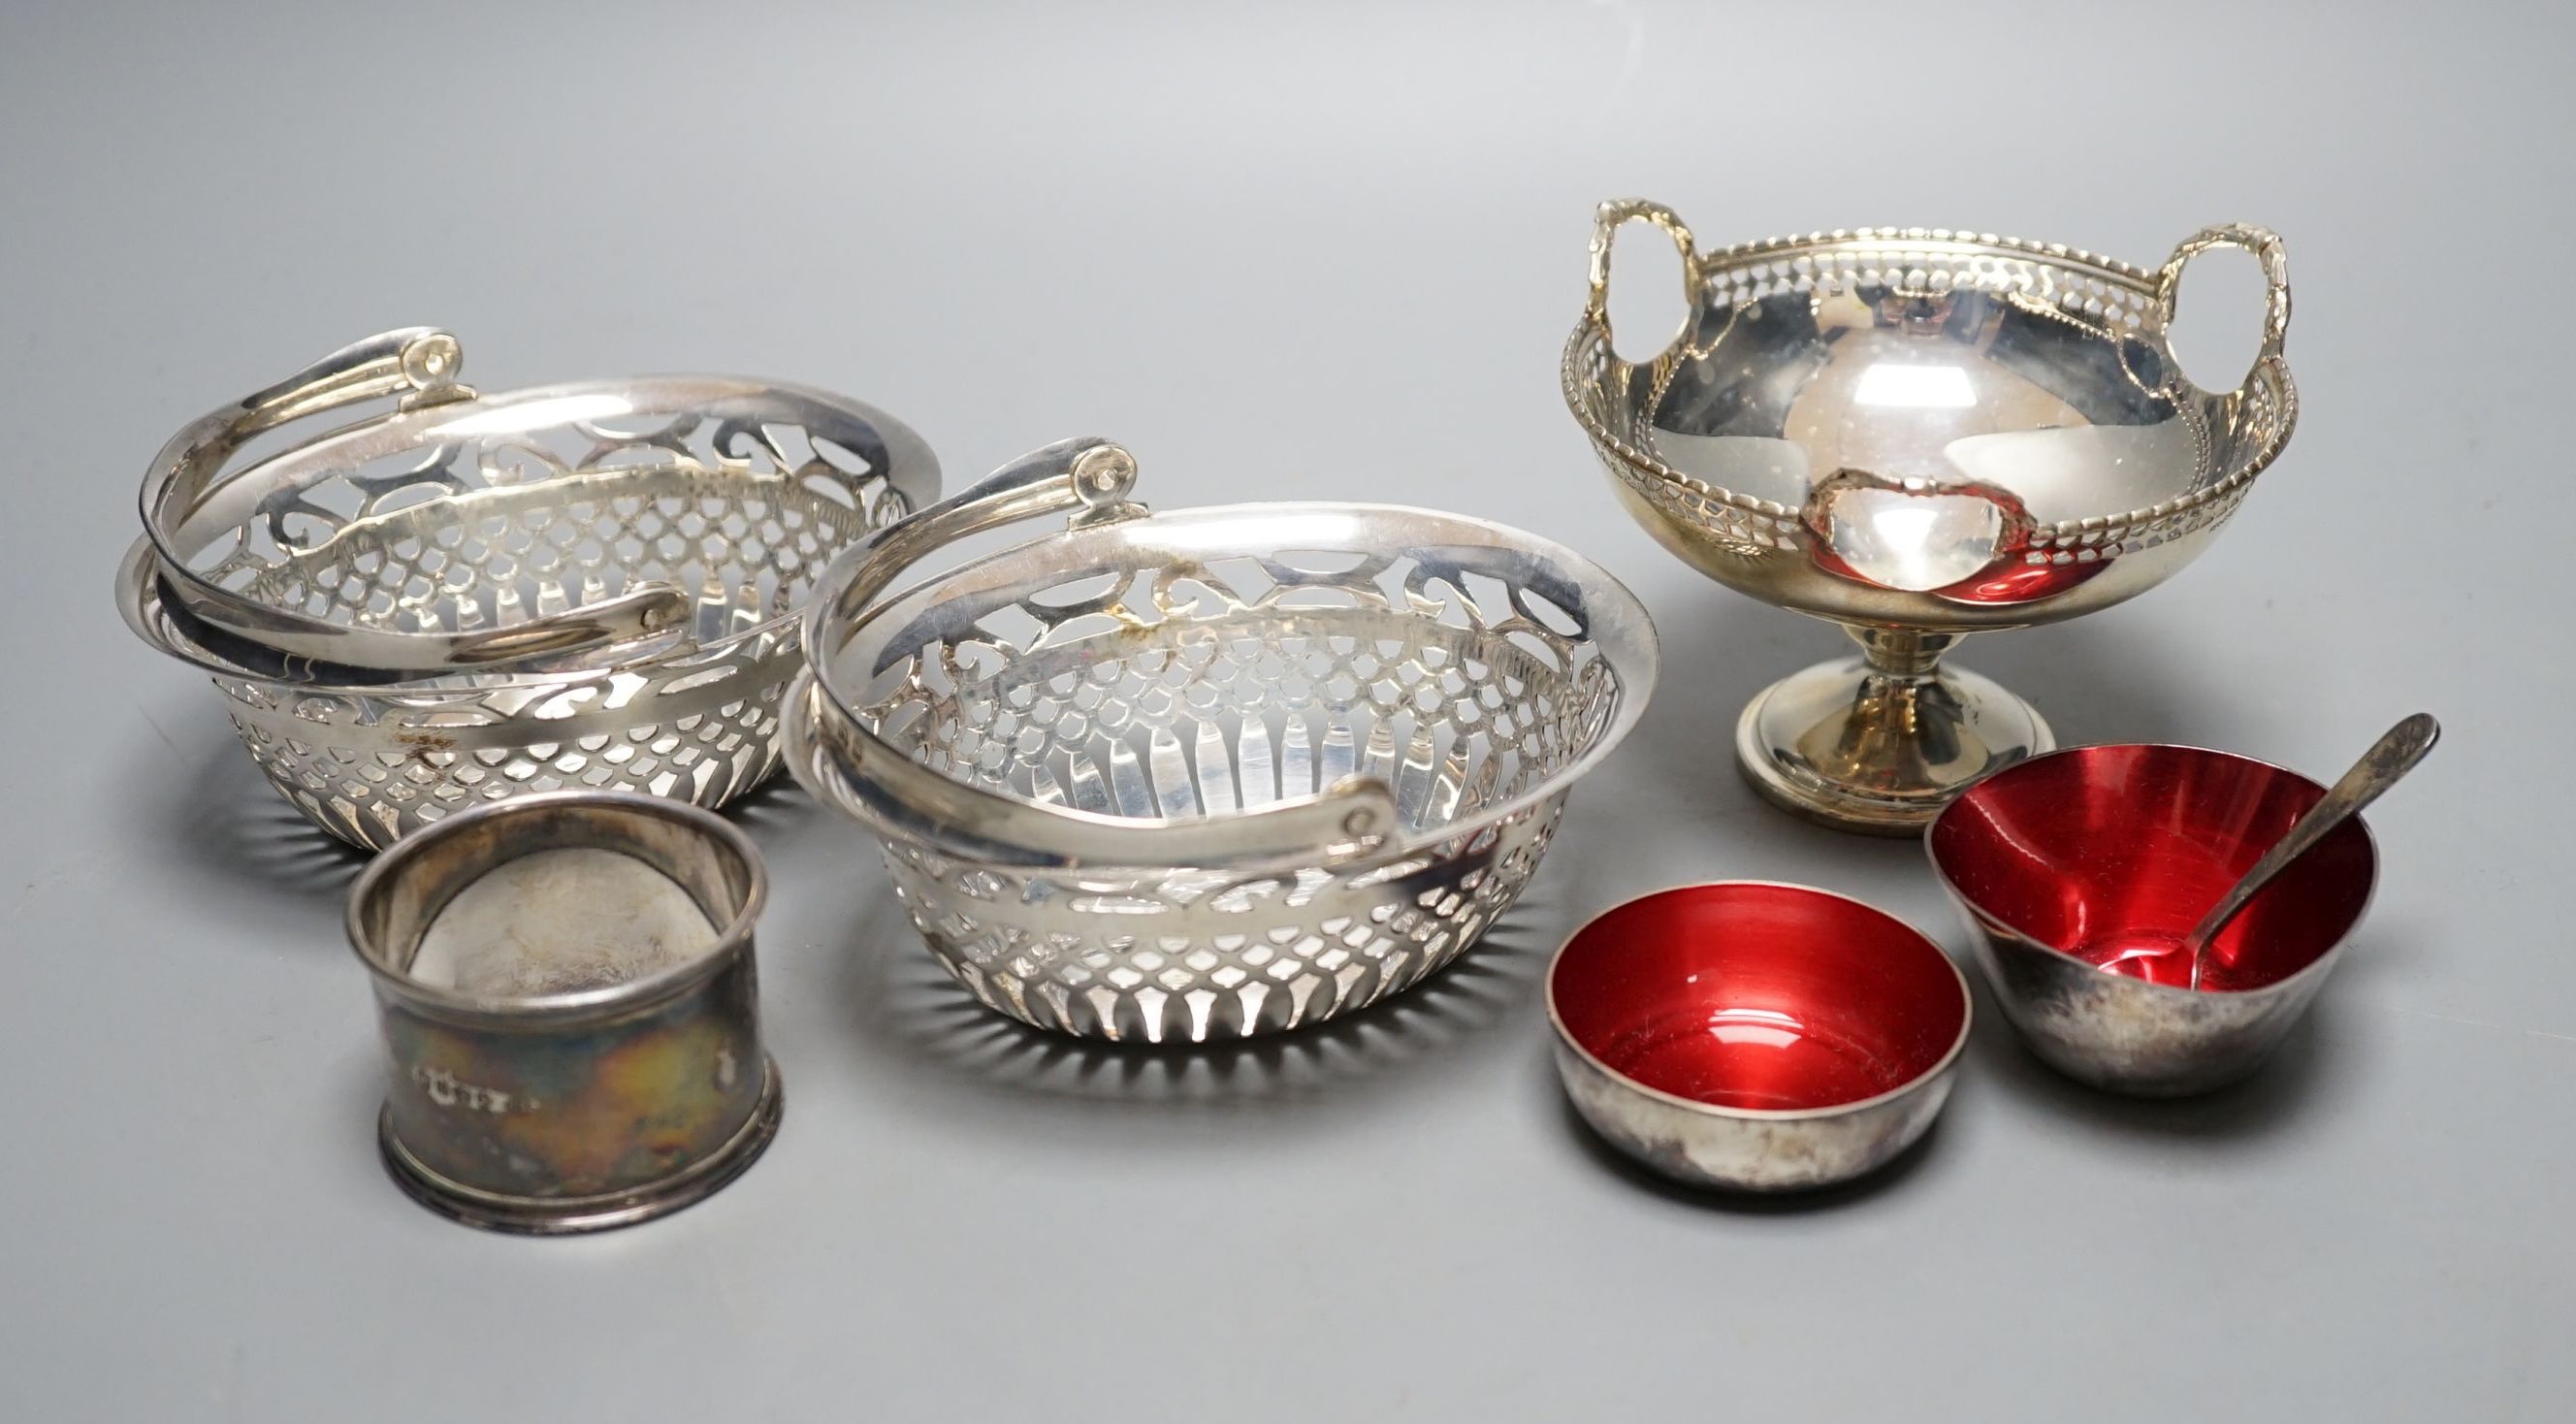 A pair of George V pierced silver bonbon baskets, a small pedestal bowl and napkin ring and two small Danish enamelled bowls.